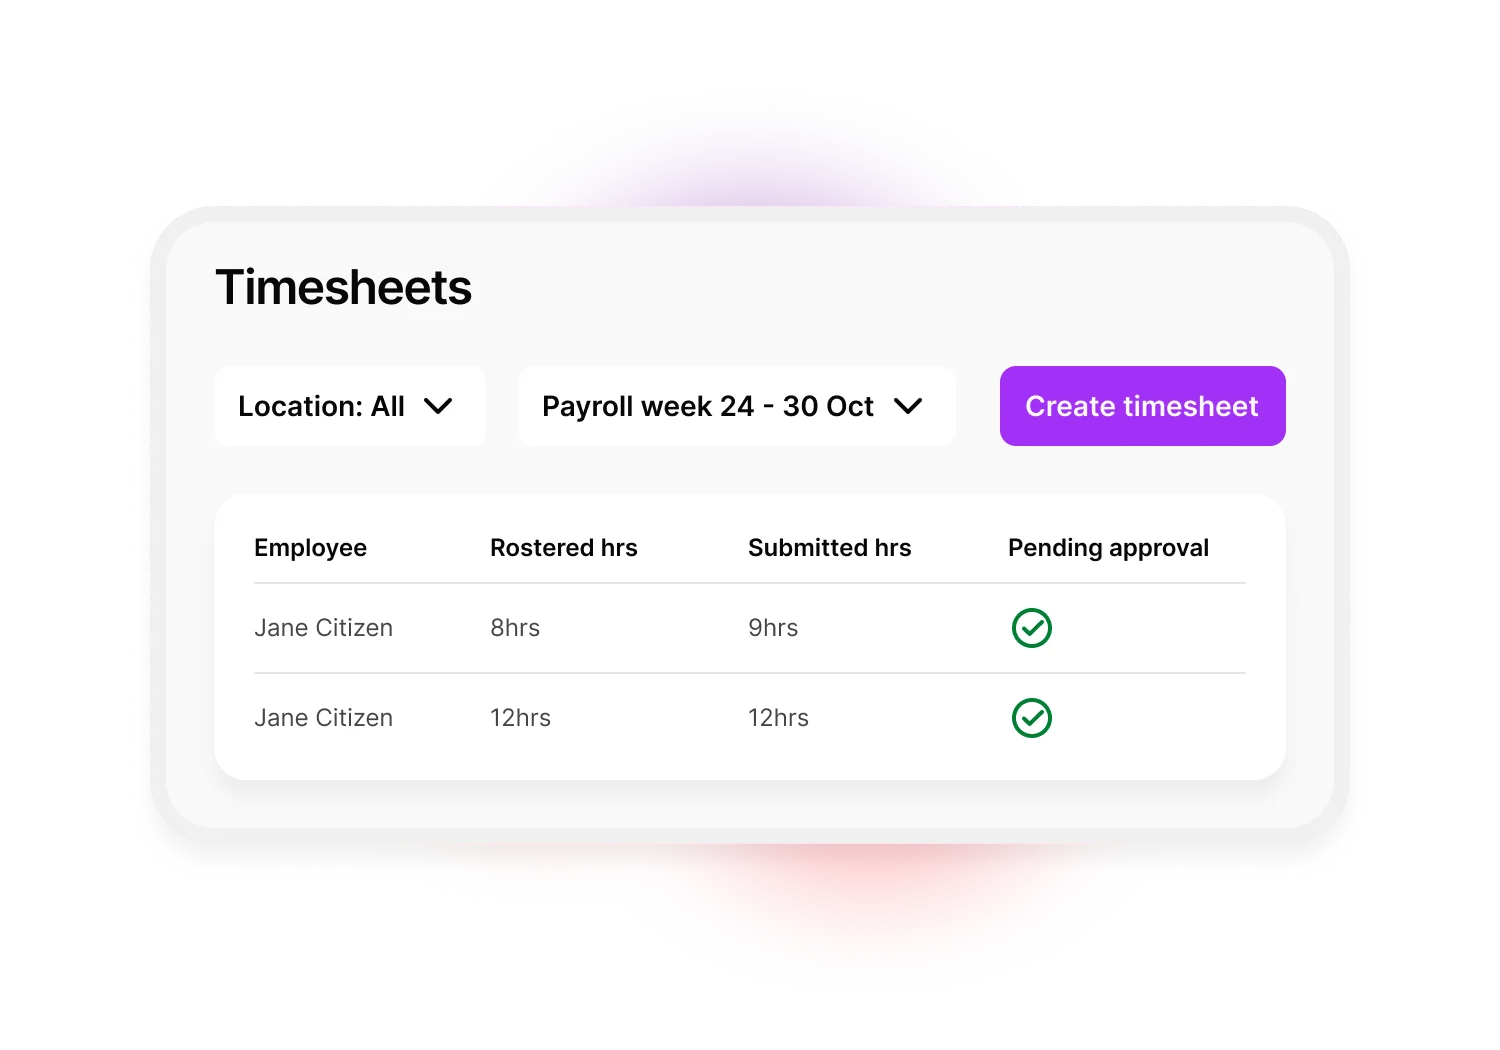 A simplifed version of the timesheet screen in MYOB Business Payroll Only. Along the top, there are two dropdown menus, one for location and one for dates.